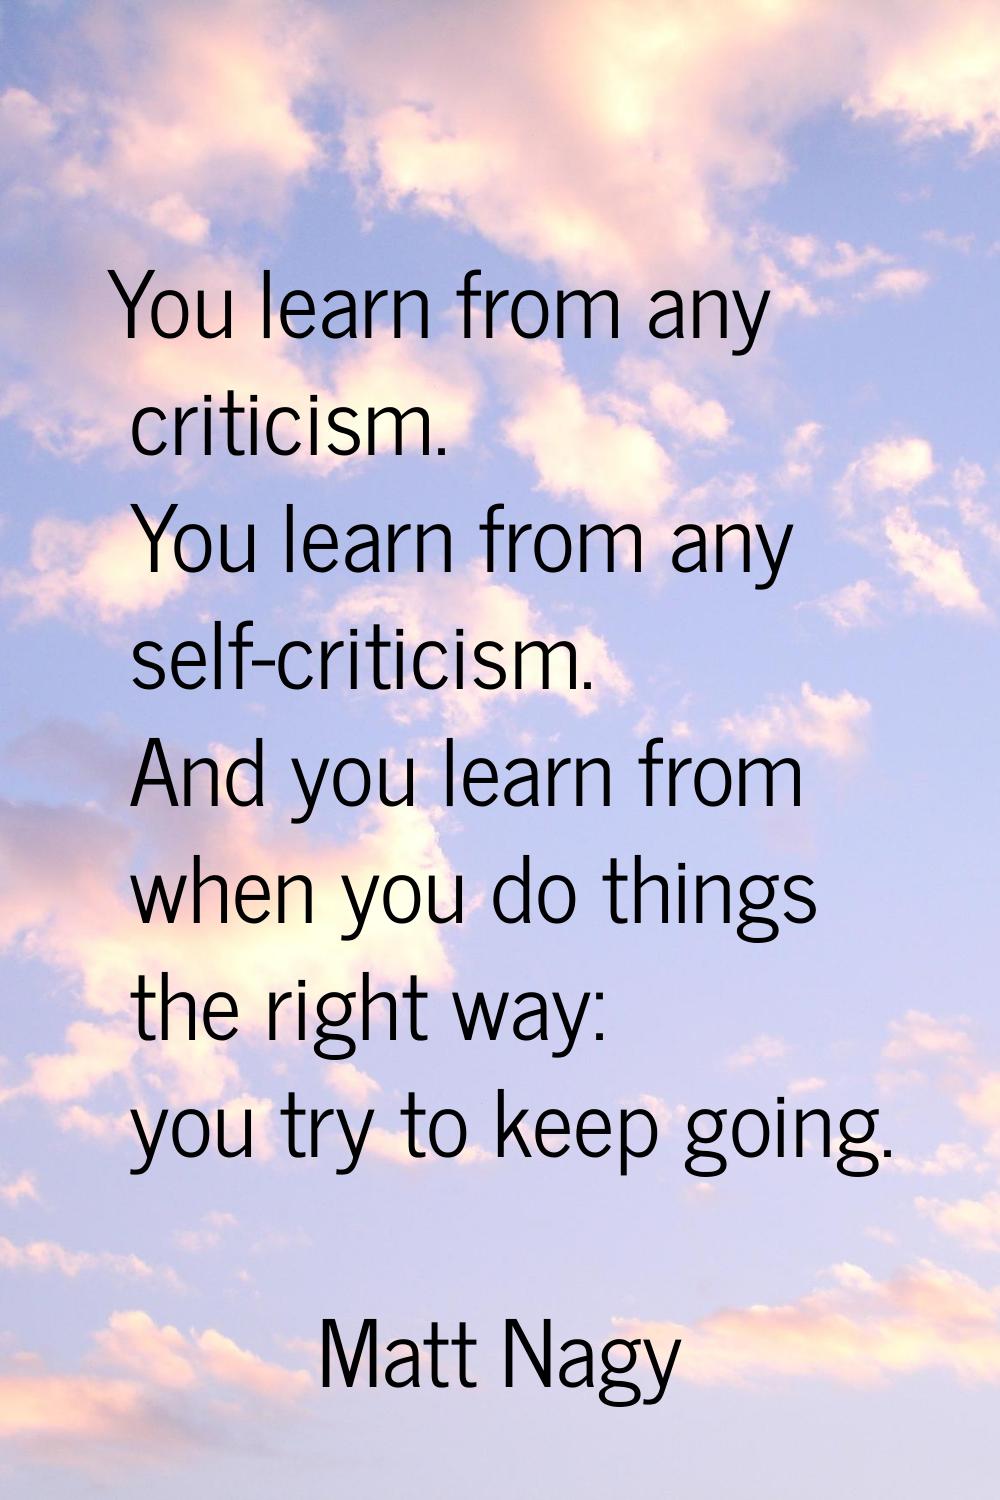 You learn from any criticism. You learn from any self-criticism. And you learn from when you do thi